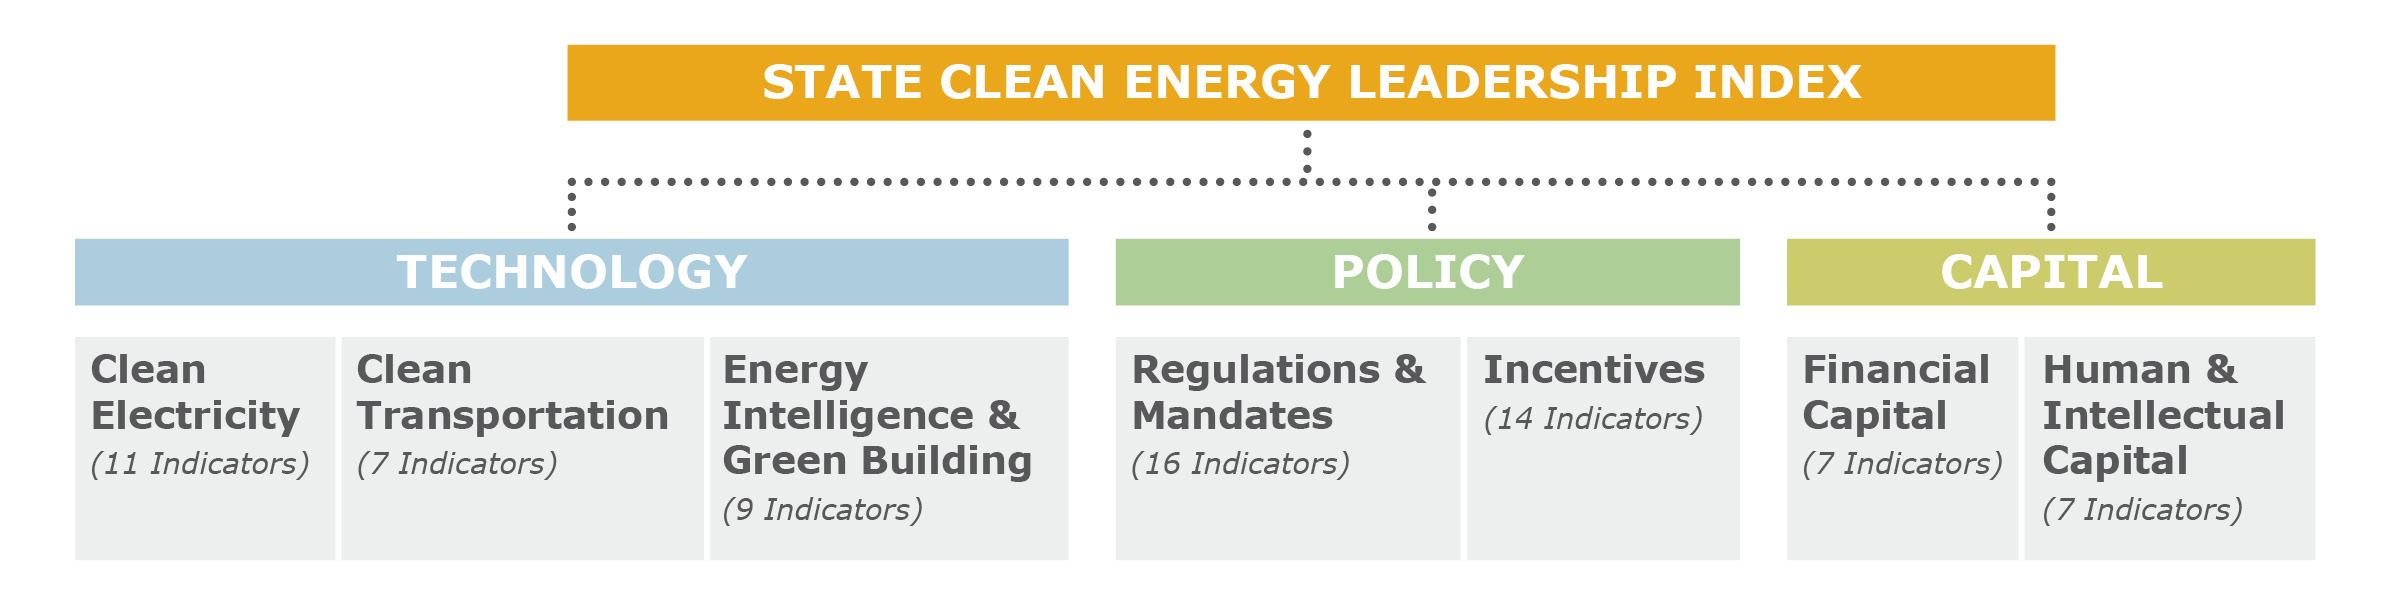 State Clean Energy Index categories